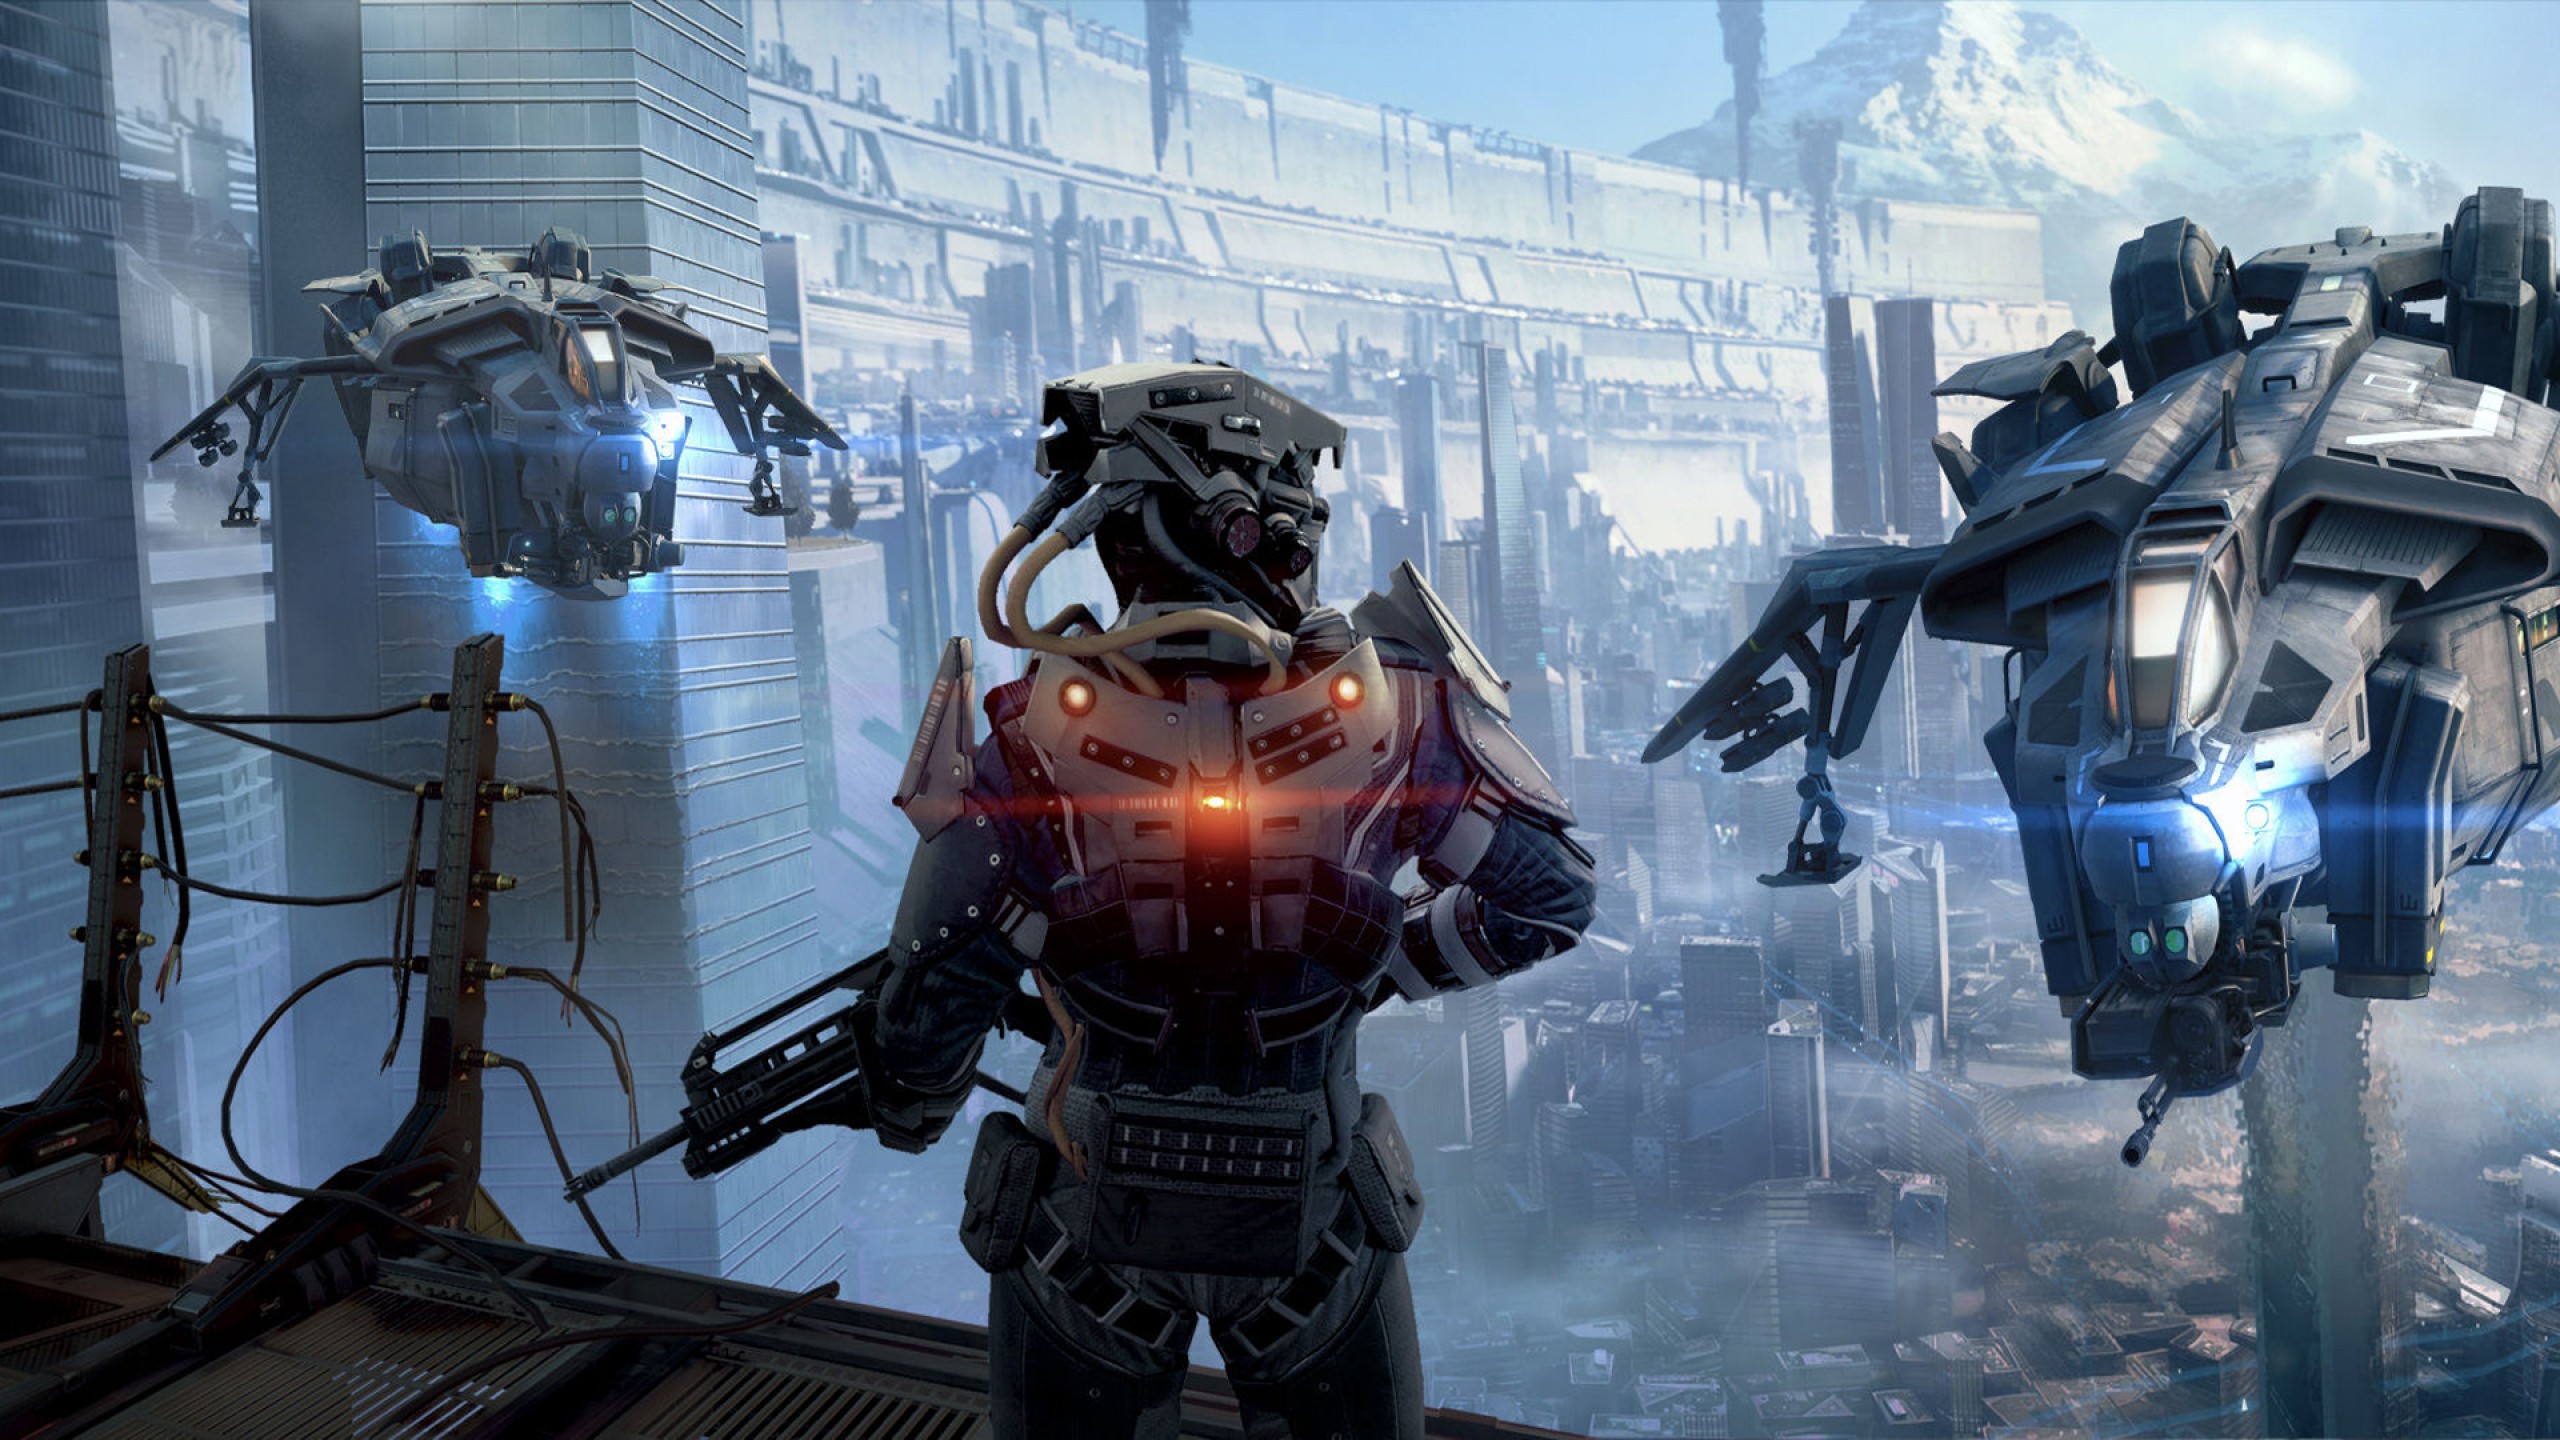 The Production and Visual FX of Killzone Shadow Fall